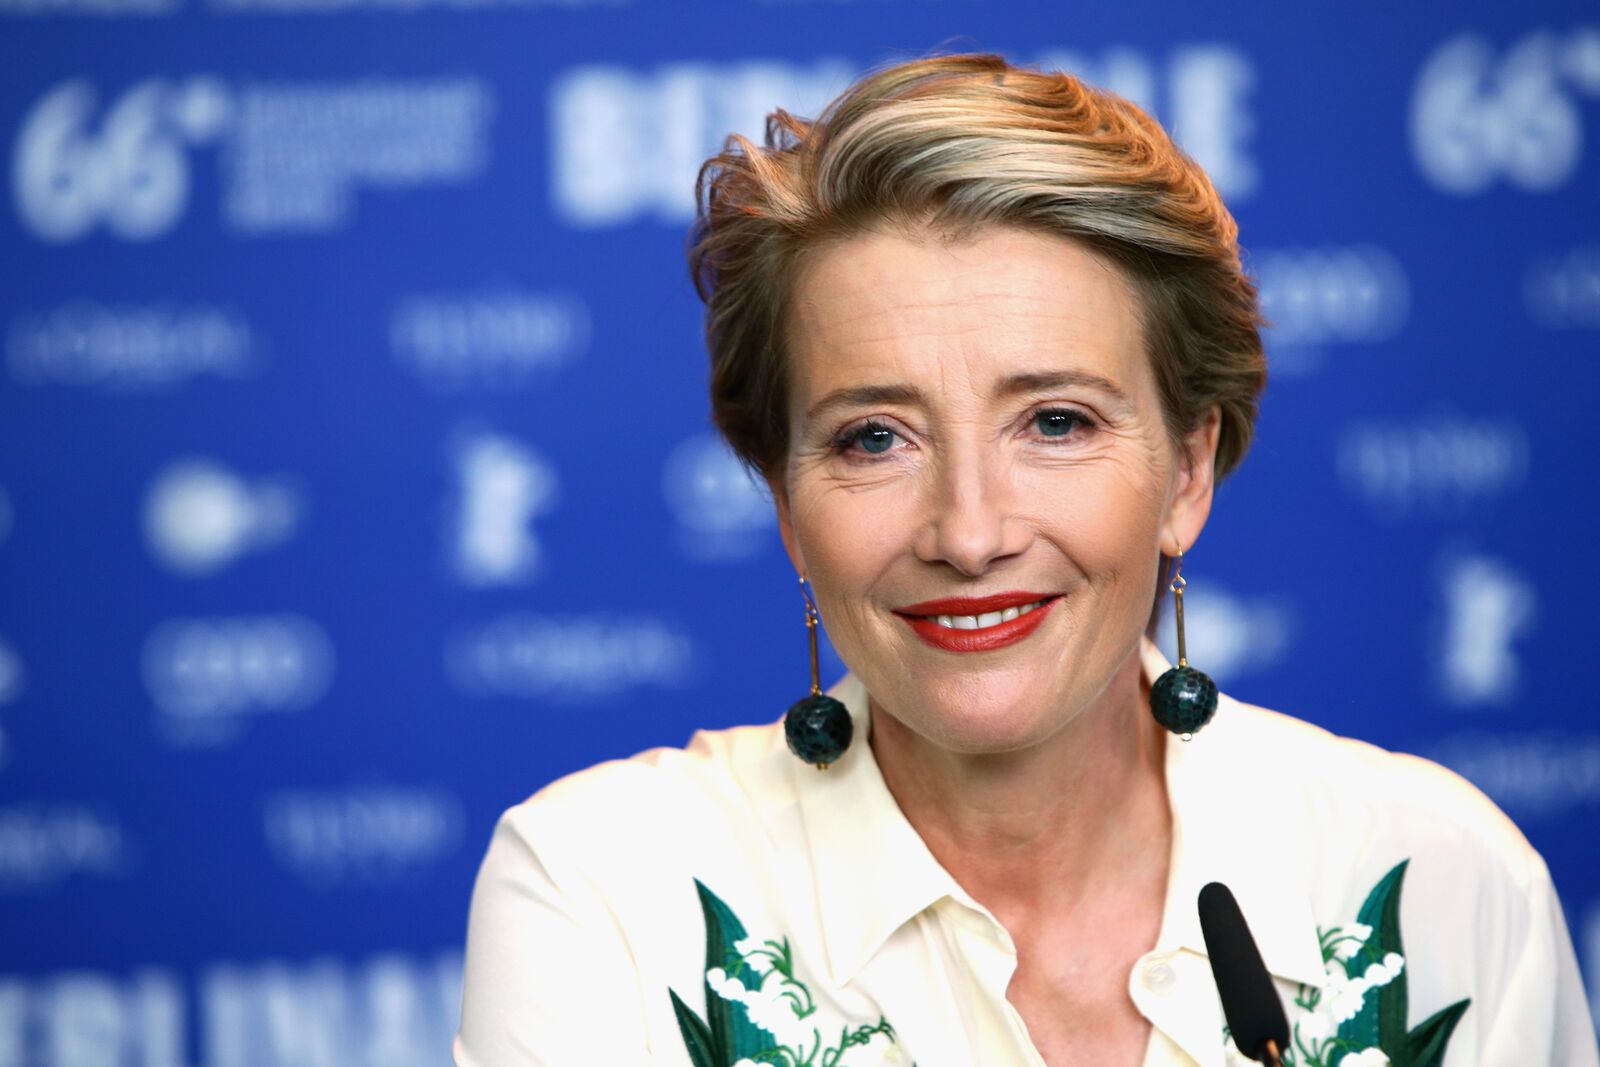 Emma Thompson at the "Alone in Berlin" press conference during the 66th Berlinale International Film Festival Berlin on February 15, 2016, in Germany | Photo: Getty Images